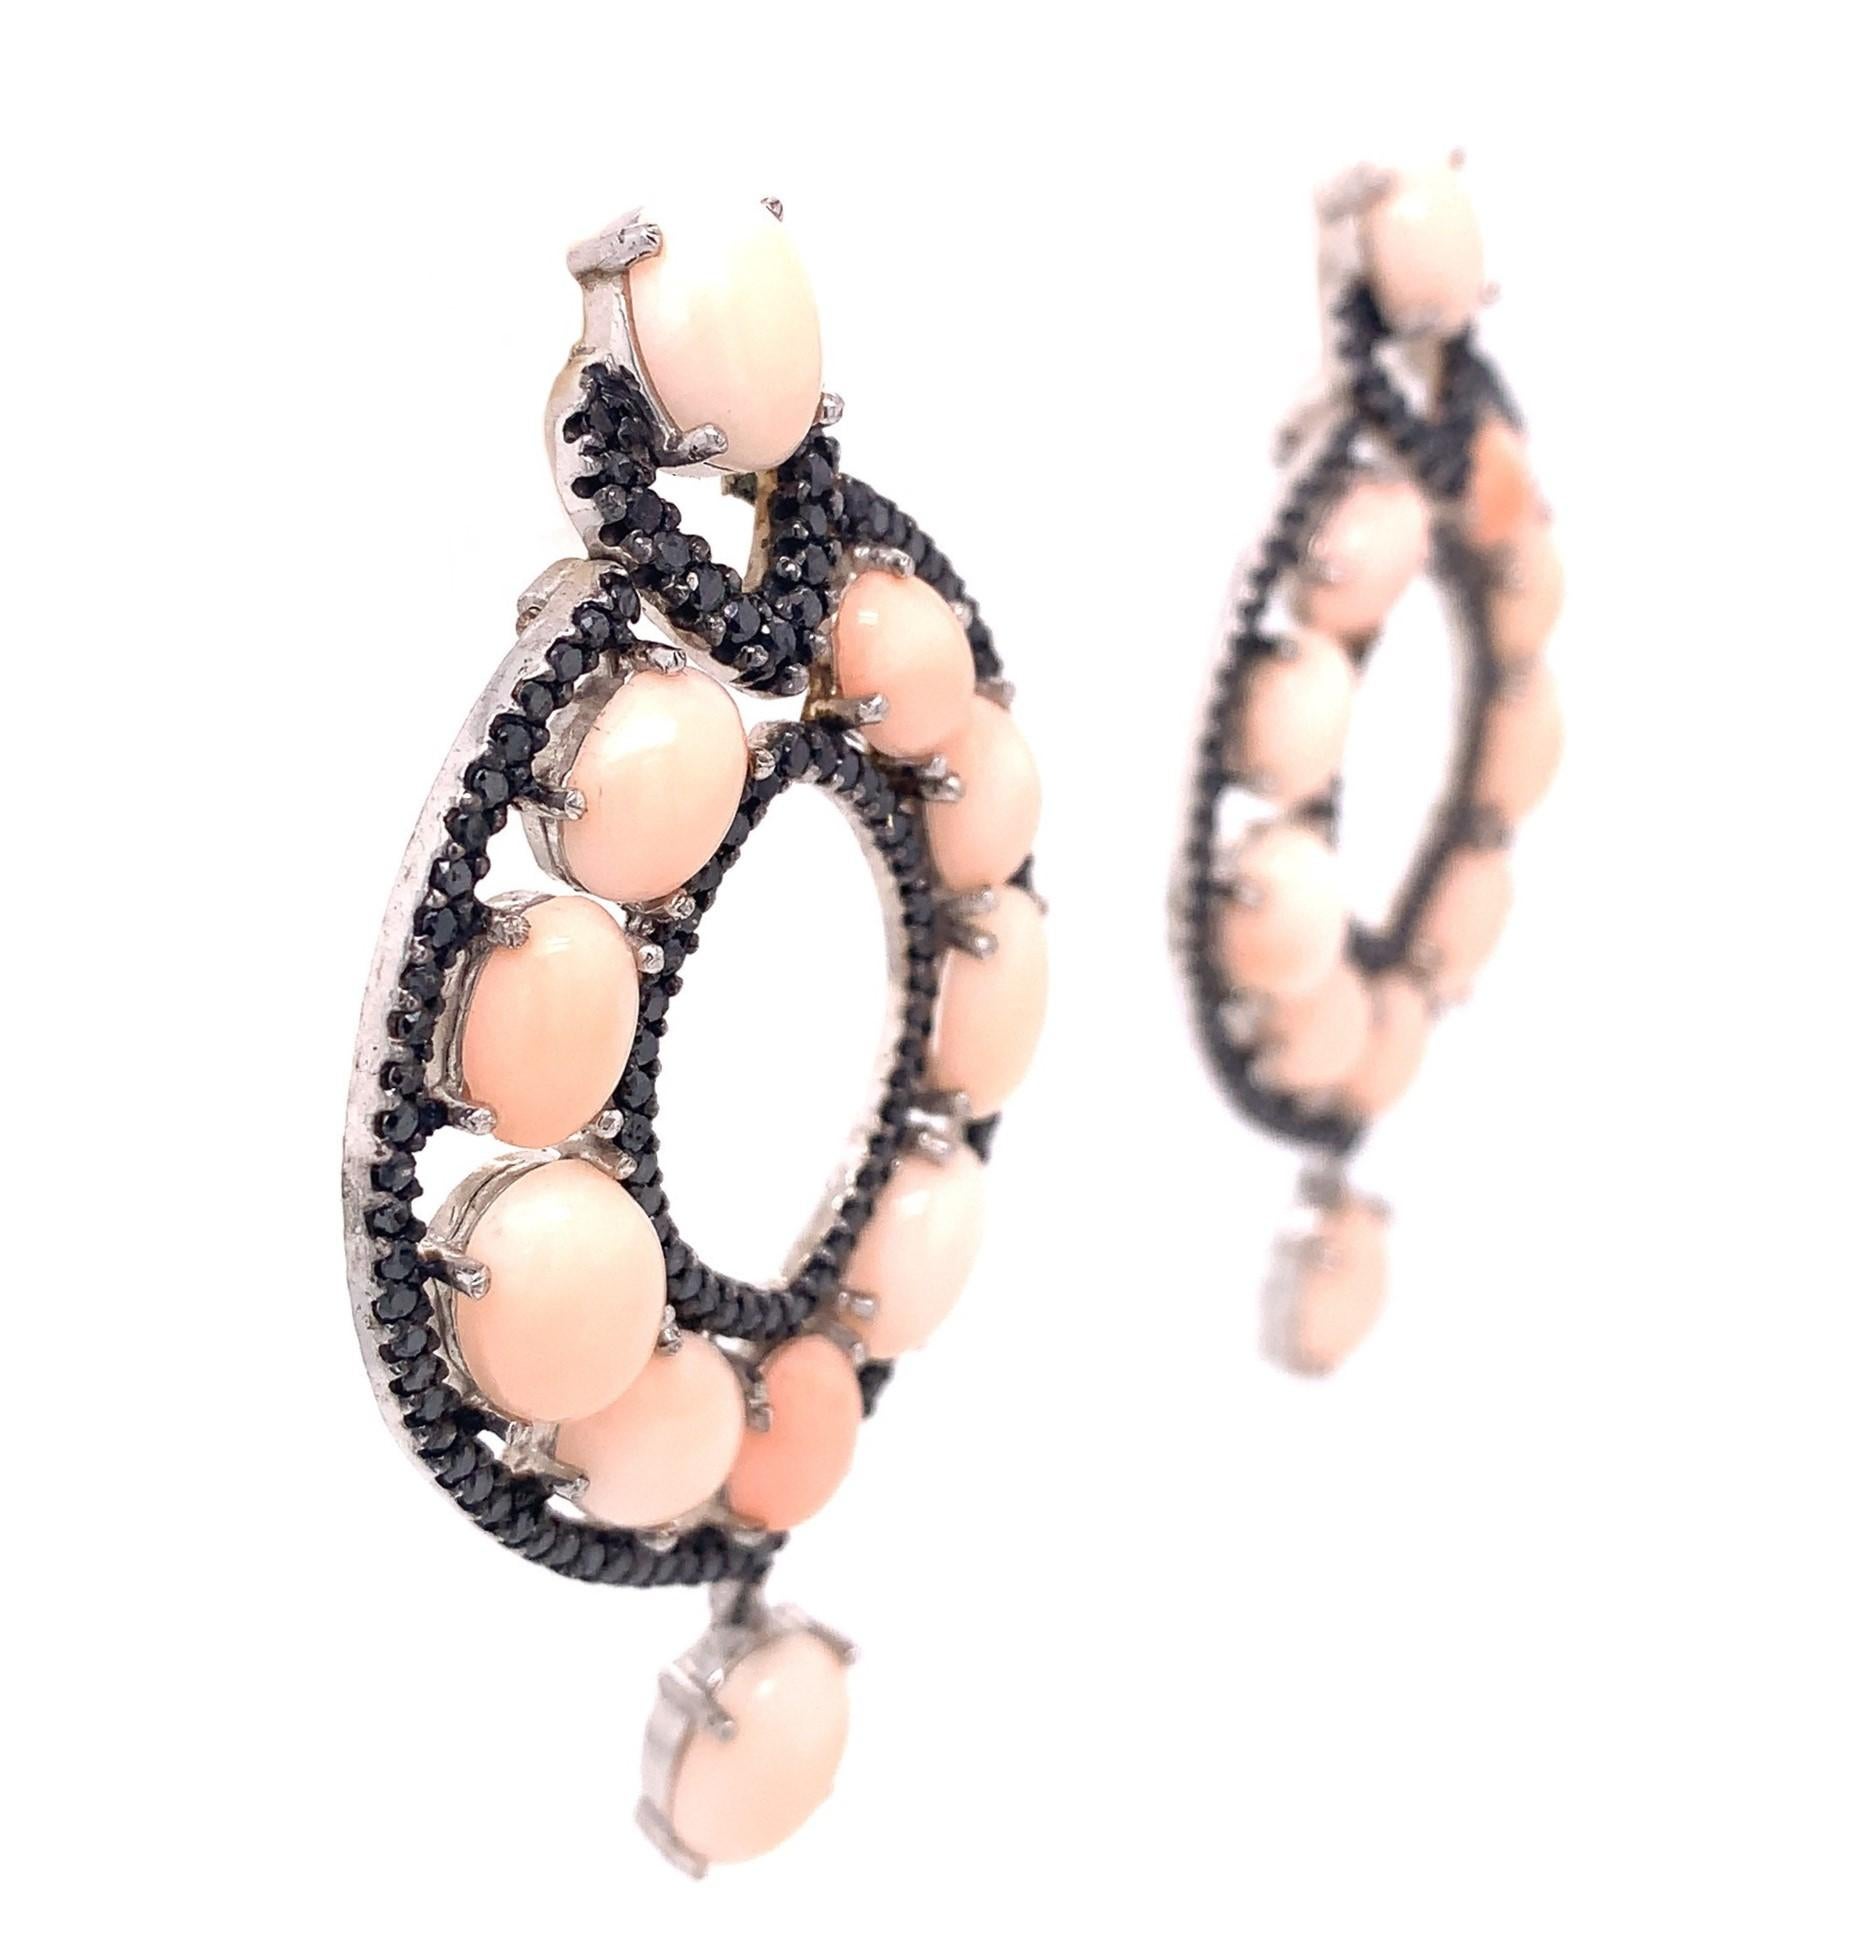 Life in color Collection

Amazing statement earring in bright fun Coral and Black Diamond. Set in Sterling Silver.

Coral: 53.92ct total weight.
Diamond: 5.69ct total weight.